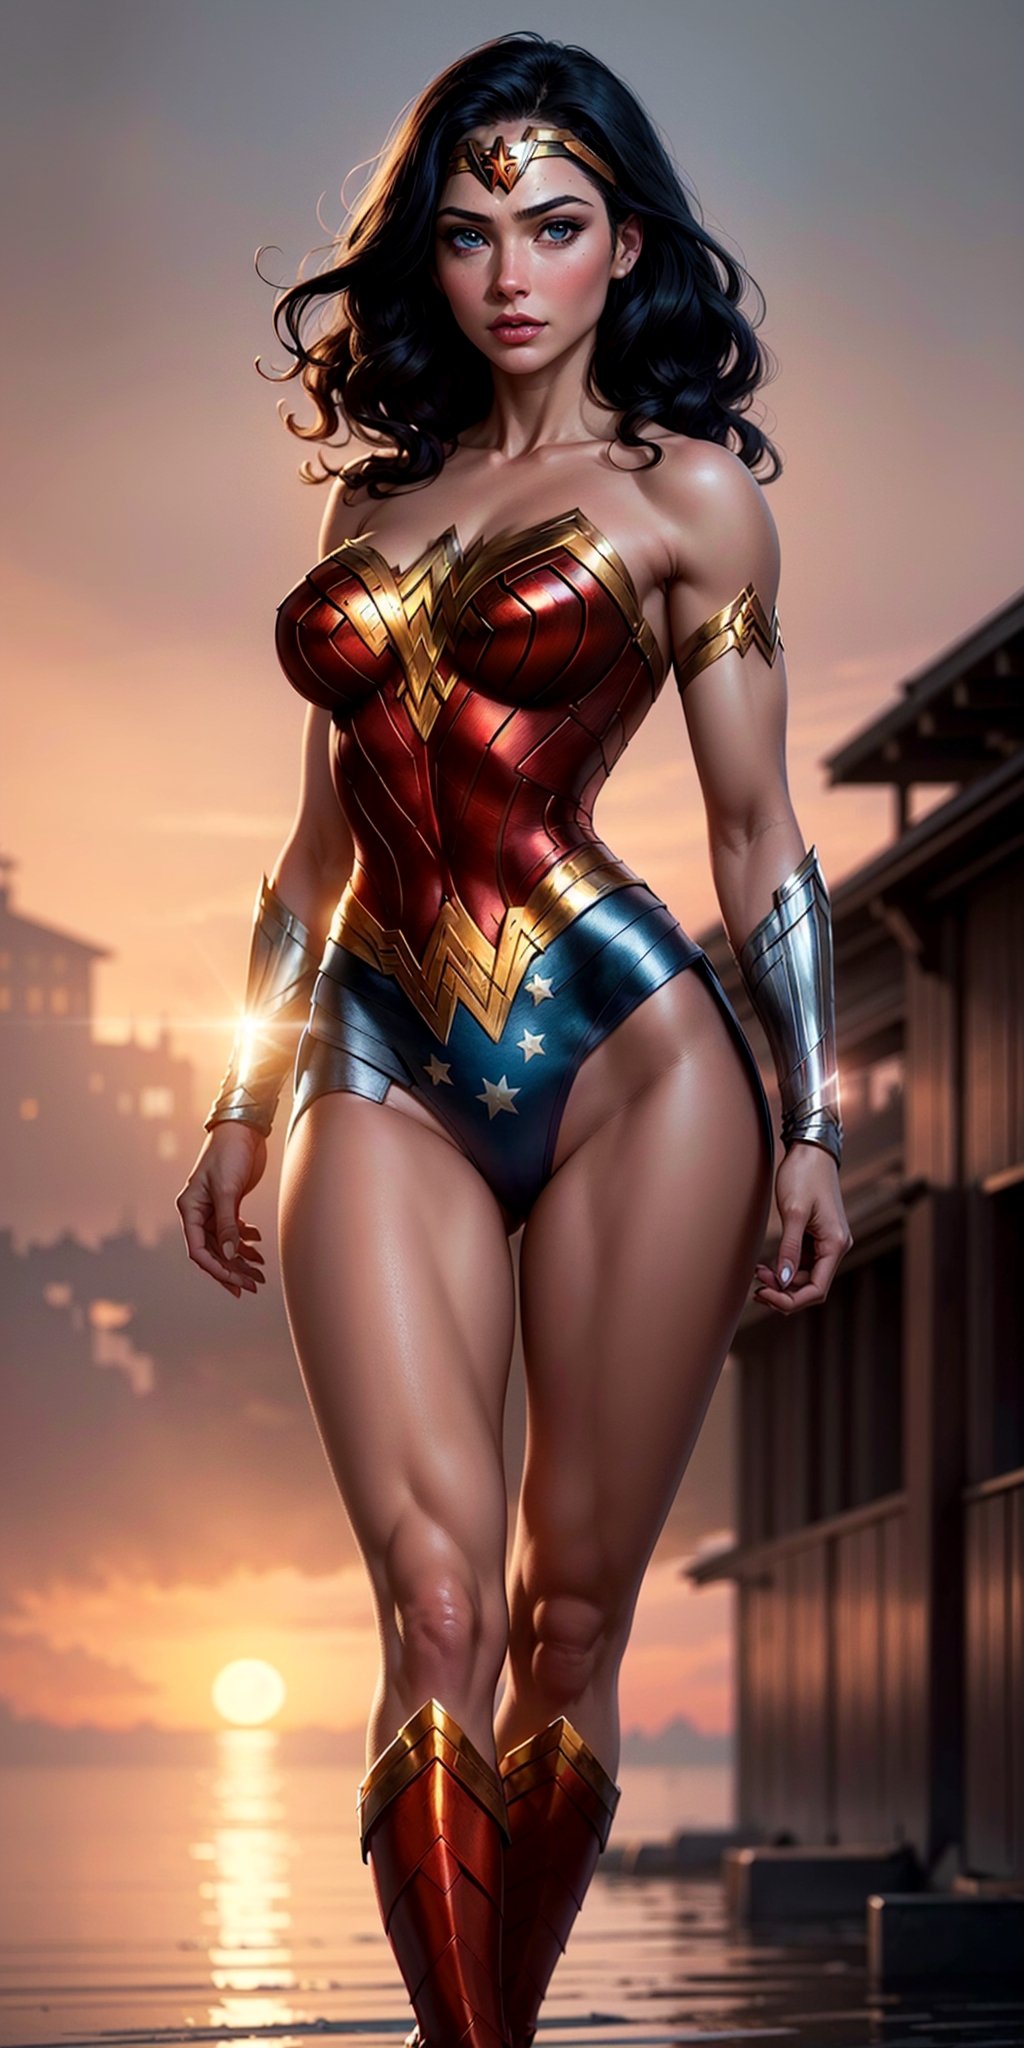 1woman, Wonder Woman, (((floating in the air))),(((flying in the air))),((full body)), ((sunset behind her)),(intricate details, makeup), (delicate and beautiful delicate face, delicate and beautiful delicate eyes, perfectly proportioned face), delicate skin, strong and realistic blue eyes, realistic black hair, lips, makeup, natural skin texture, tiara, jewelry, (star), \(symbol\),(((leotard))), (((wonder woman uniform))), gauntlet, red boots, golden girdle, (public clothing: 1.5), bare shoulders, slightly sunburned complexion, mature, sexy, toned muscles, (muscles:1.2), ((view from behind)), ((strong and healthy body)), ((((more) muscles))), long legs, curves, (big breasts: 1.3), thin waist, soft waist, (delicate skin), (beautiful and sexy woman), (swollen lips: 0.9), very delicate muscles, standing,(realistic: 1.5), photorealistic, octane rendering, hyperrealistic, tight modeling, (photorealistic face: 1.2), thick eyelashes, long eyelashes, (curly dark hair: 1.1), best quality, half smile, (looking at the viewer), sharp focus, (4k), (masterpiece), (best quality), fantasy, extremely detailed, intricate, hyper detailed, (perfect face), illustration, soft lighting,(specular lighting:1.4), blue eyes, absurdly photorealistic, ultra high resolution, intricate, hyperdetailed, (skindentation), female, detailed body, (detailed face: 1.1), (outlined iris), (hydrocolor lenses), (perfect eyes), 4k, gorgeous, (masterpiece: 1.2), (best quality:1.2),